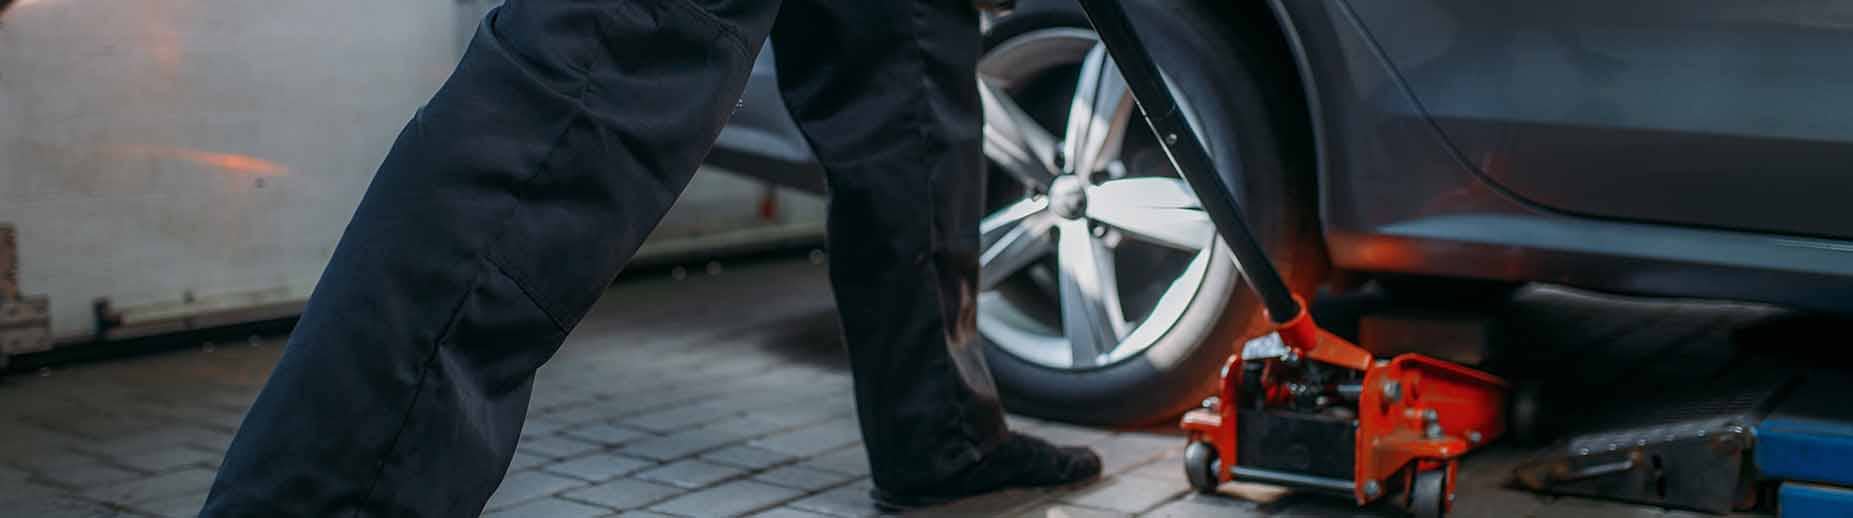 Lowell Tire Balancing Services, Tire Rotation and Tire Repair